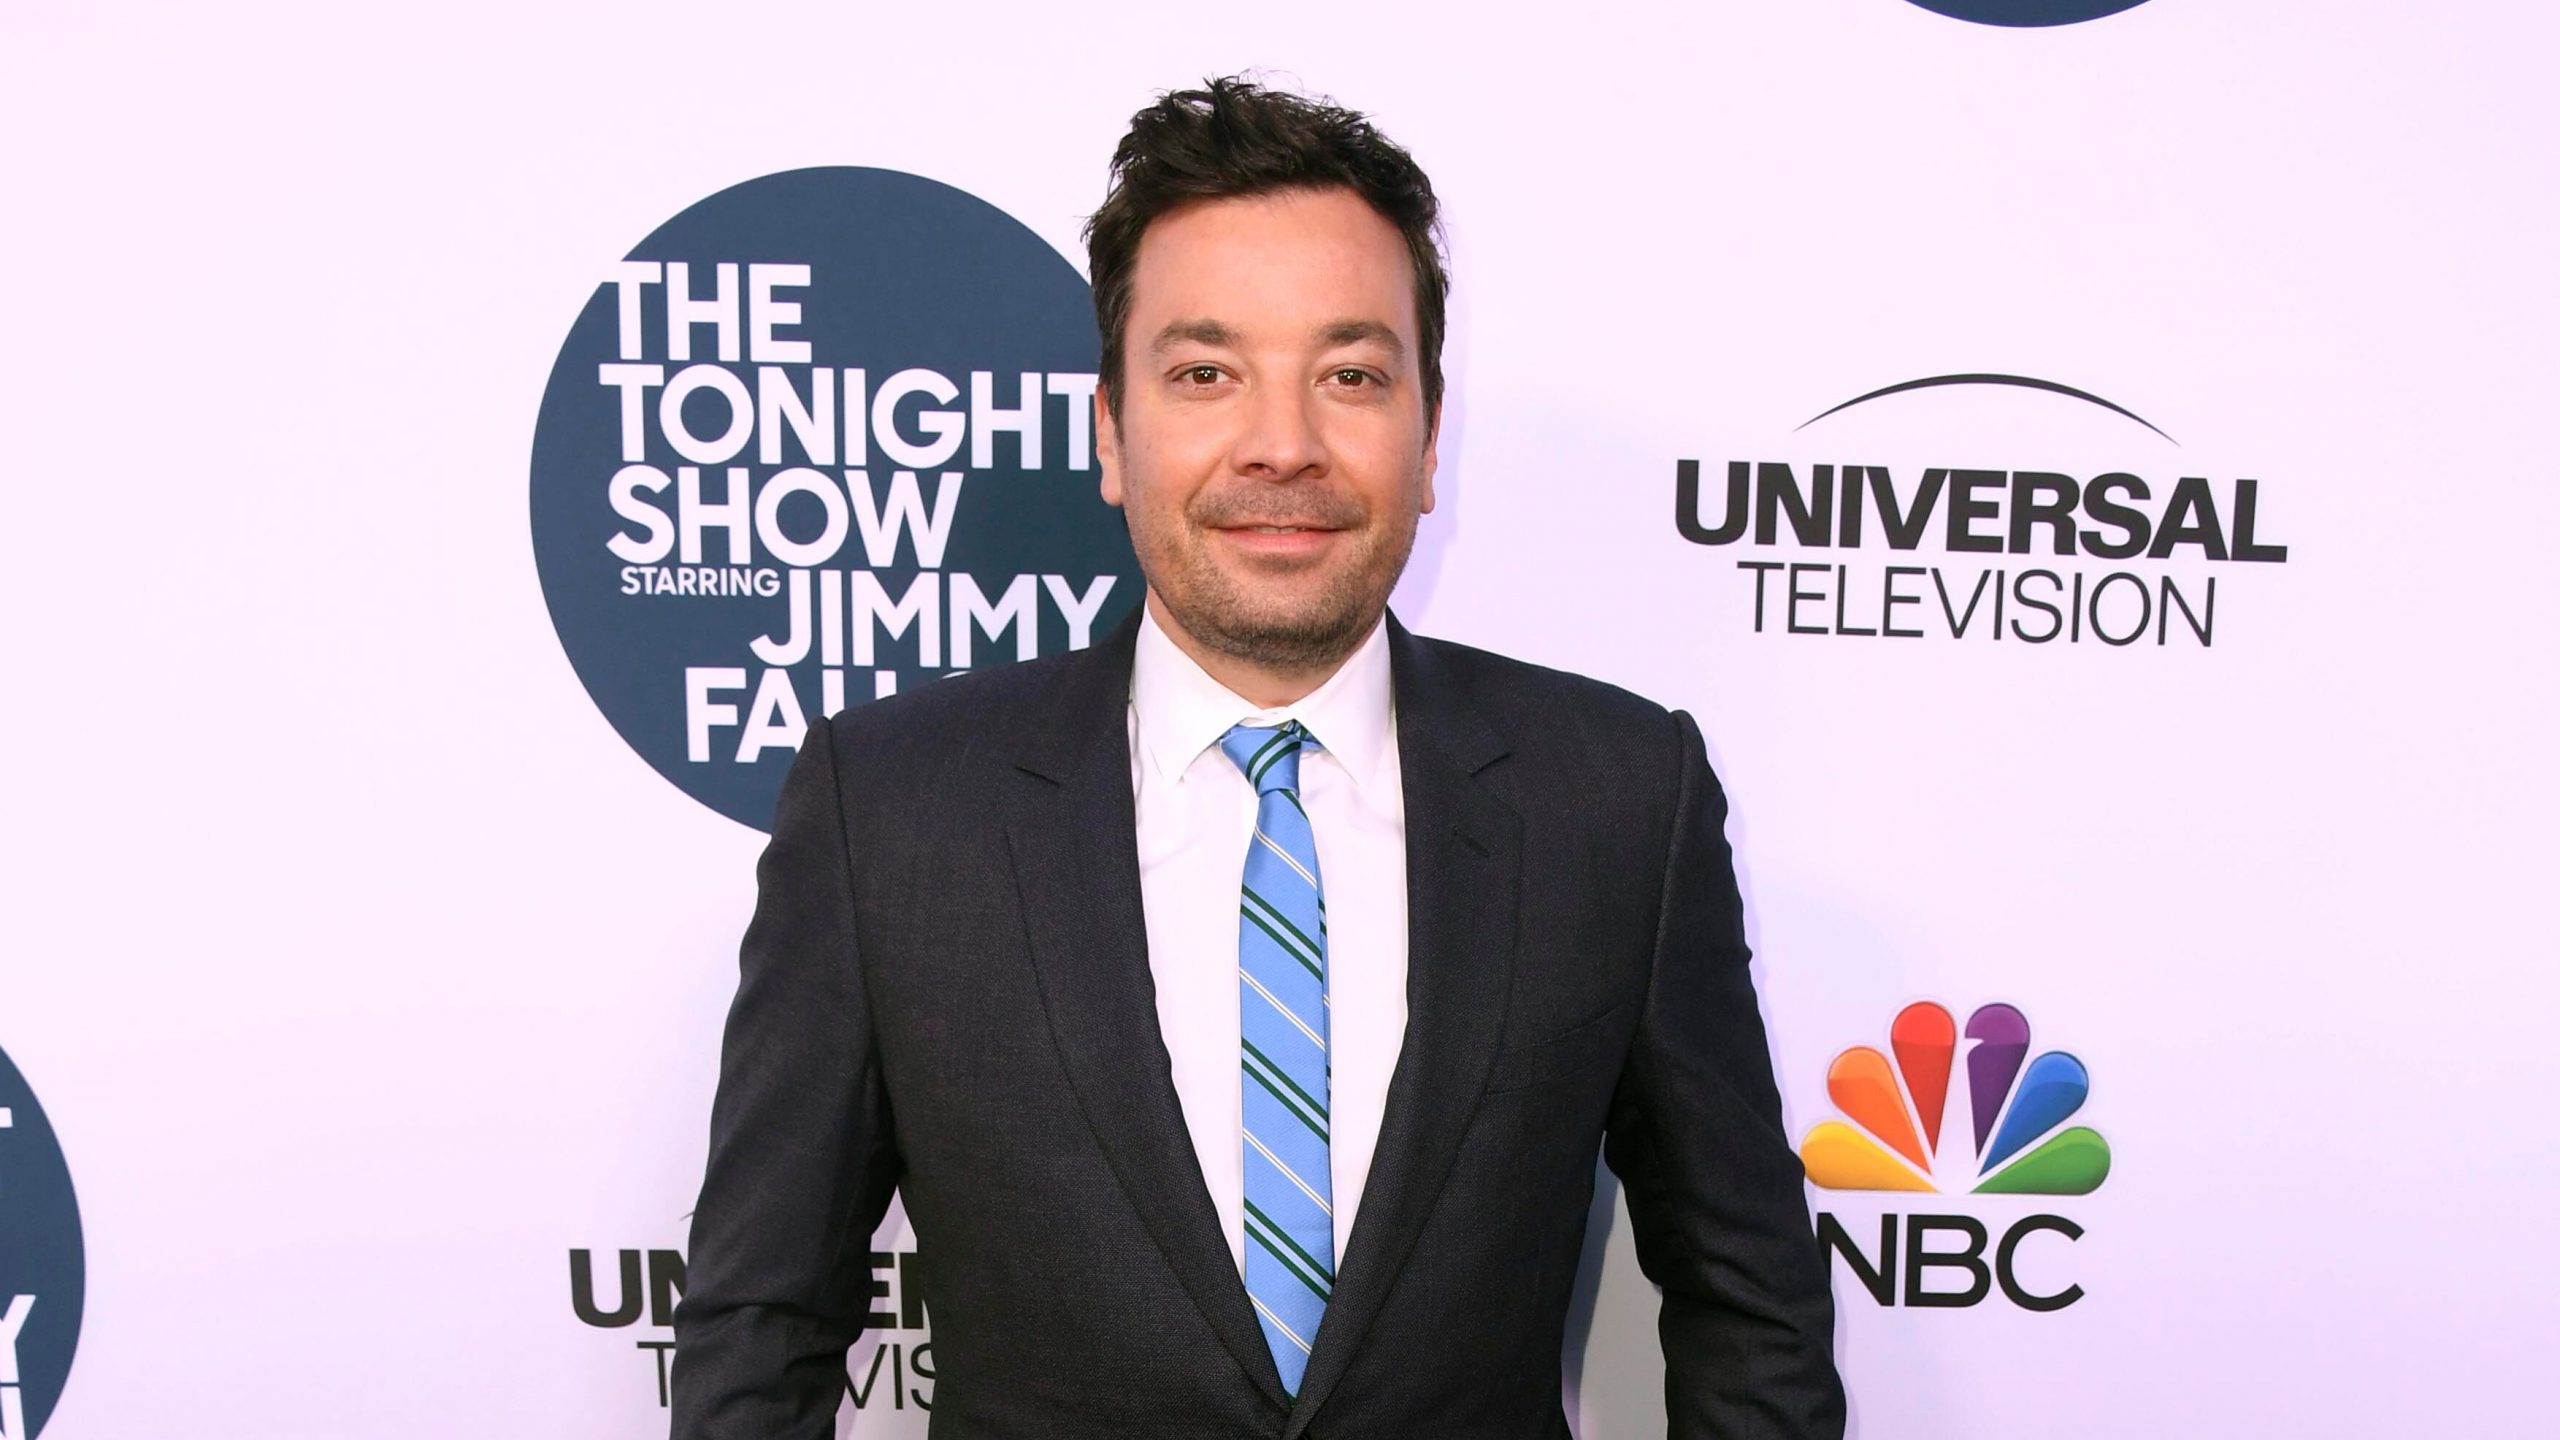 Jimmy Fallon has the lowest “Tonight” audience rating.